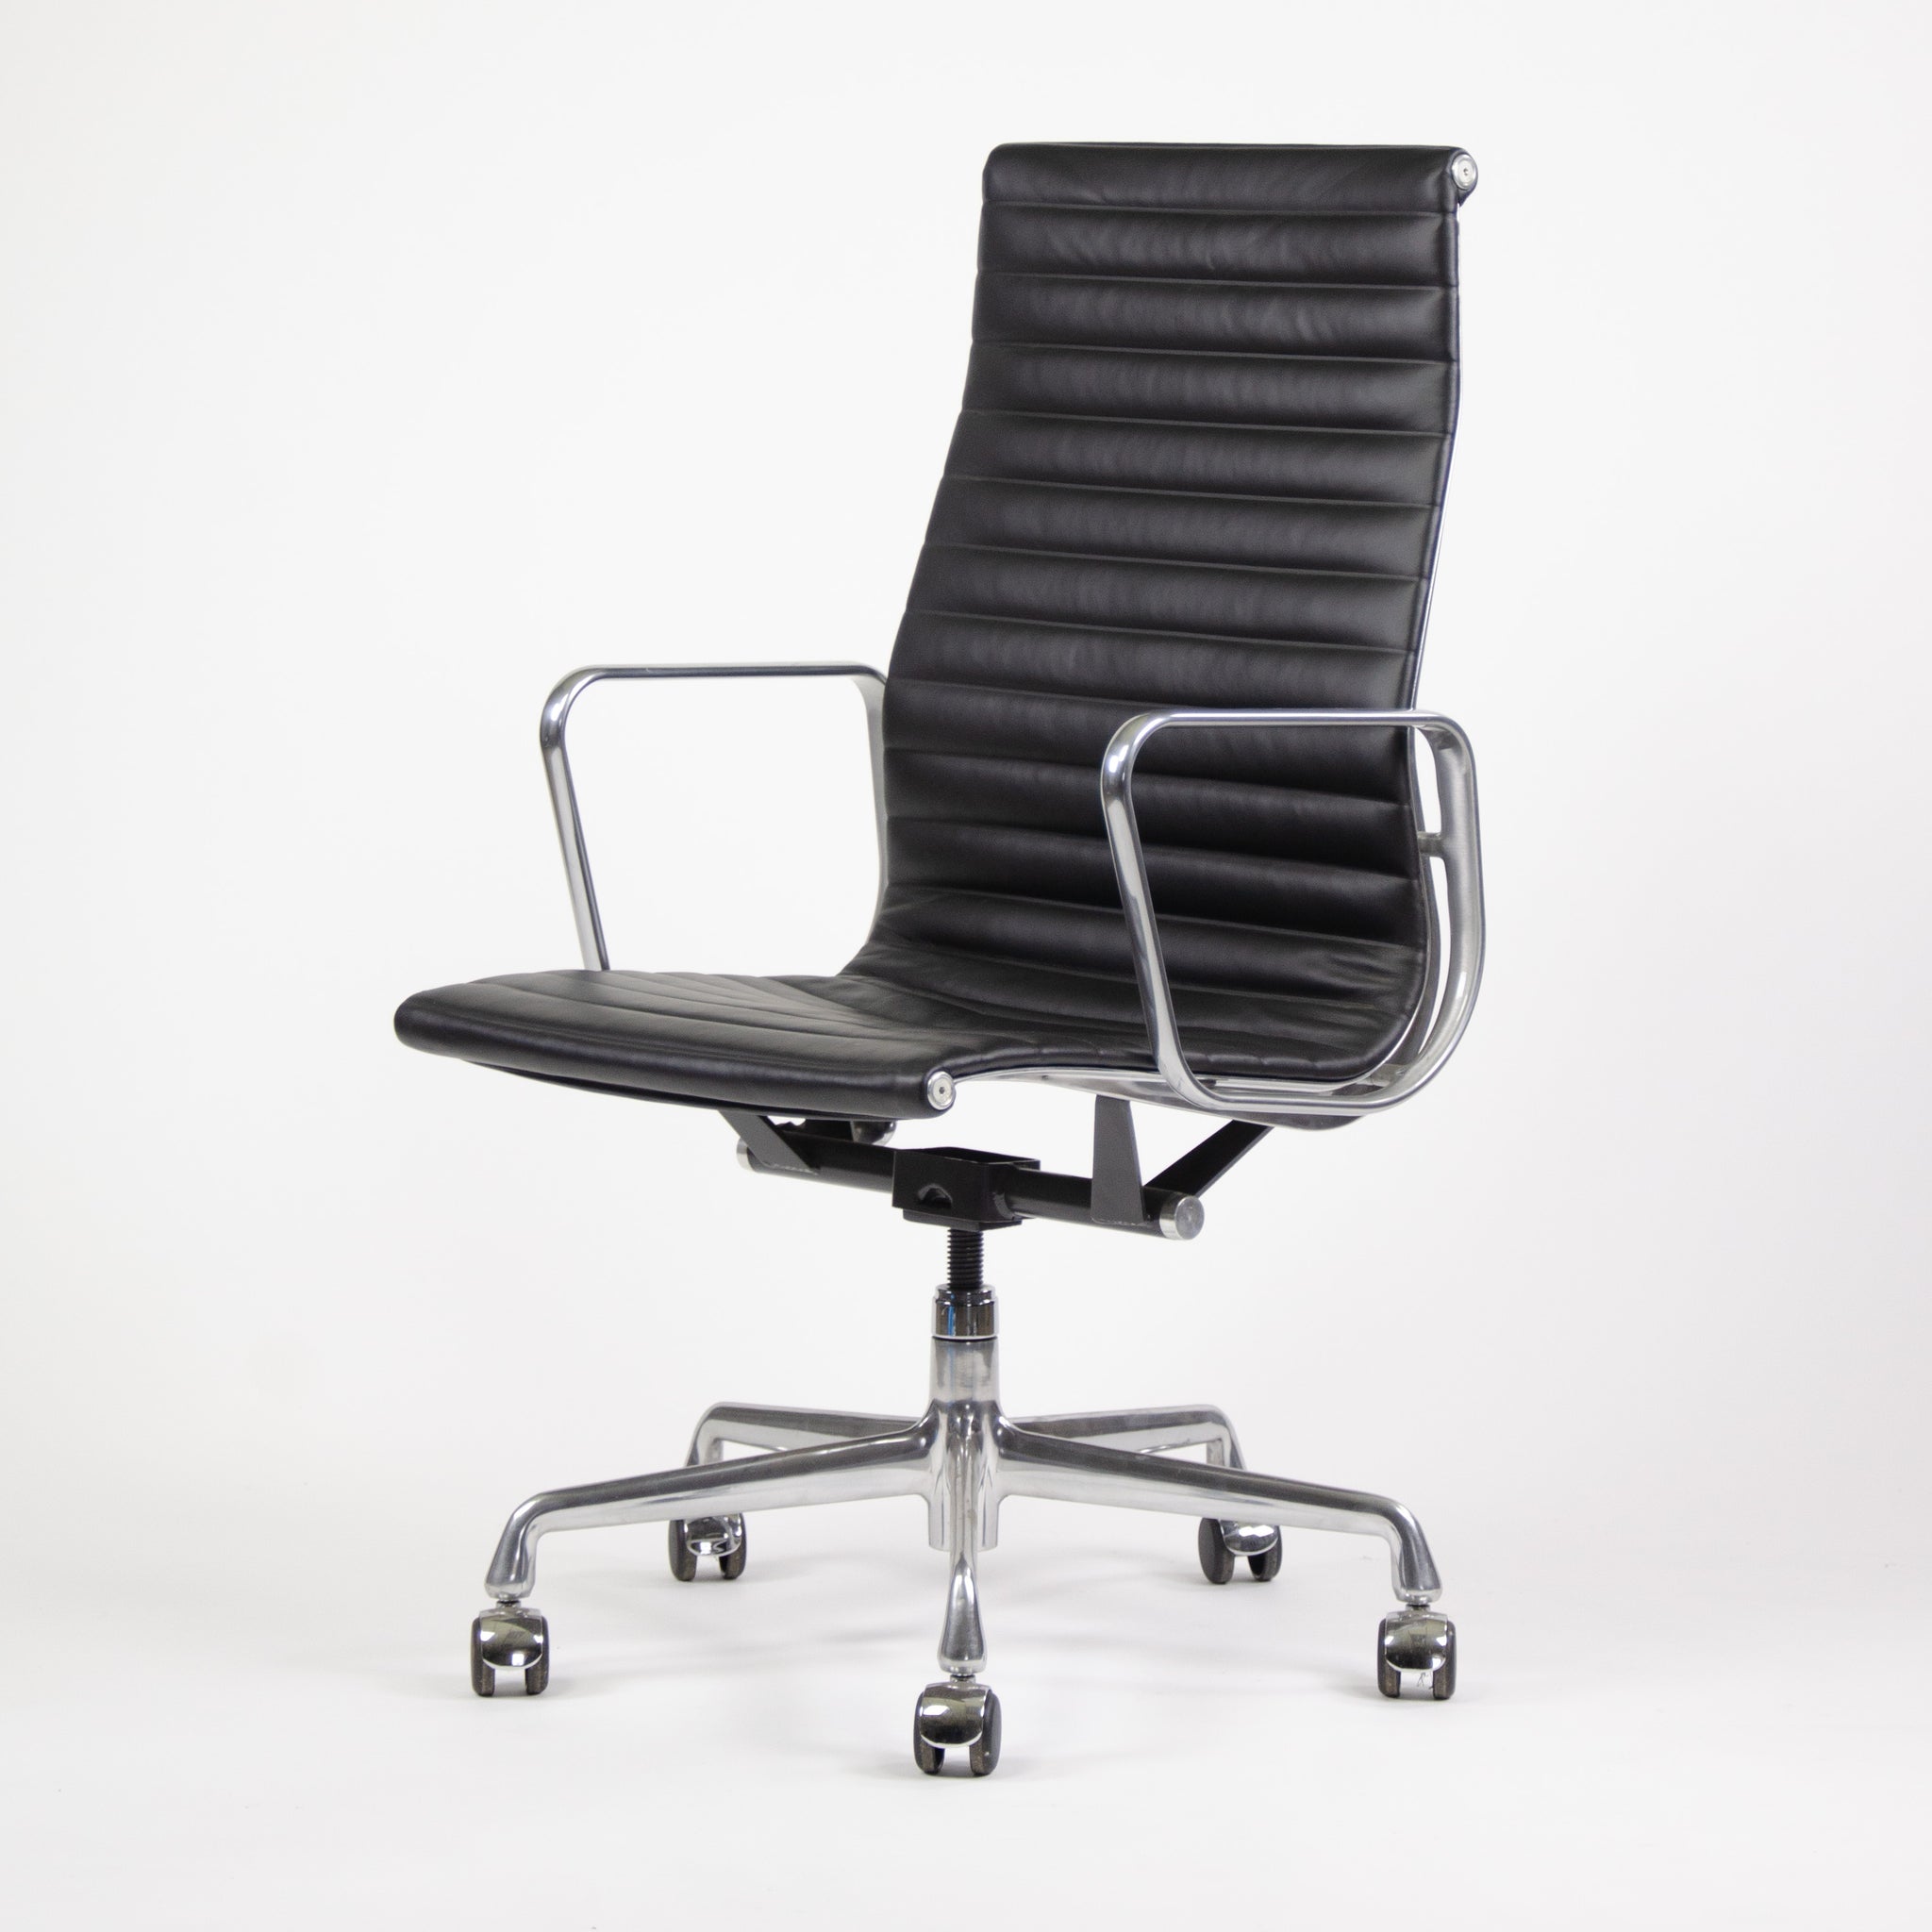 SOLD Herman Miller Eames Leather High Back Executive Aluminum Group Desk Chairs 2 Available